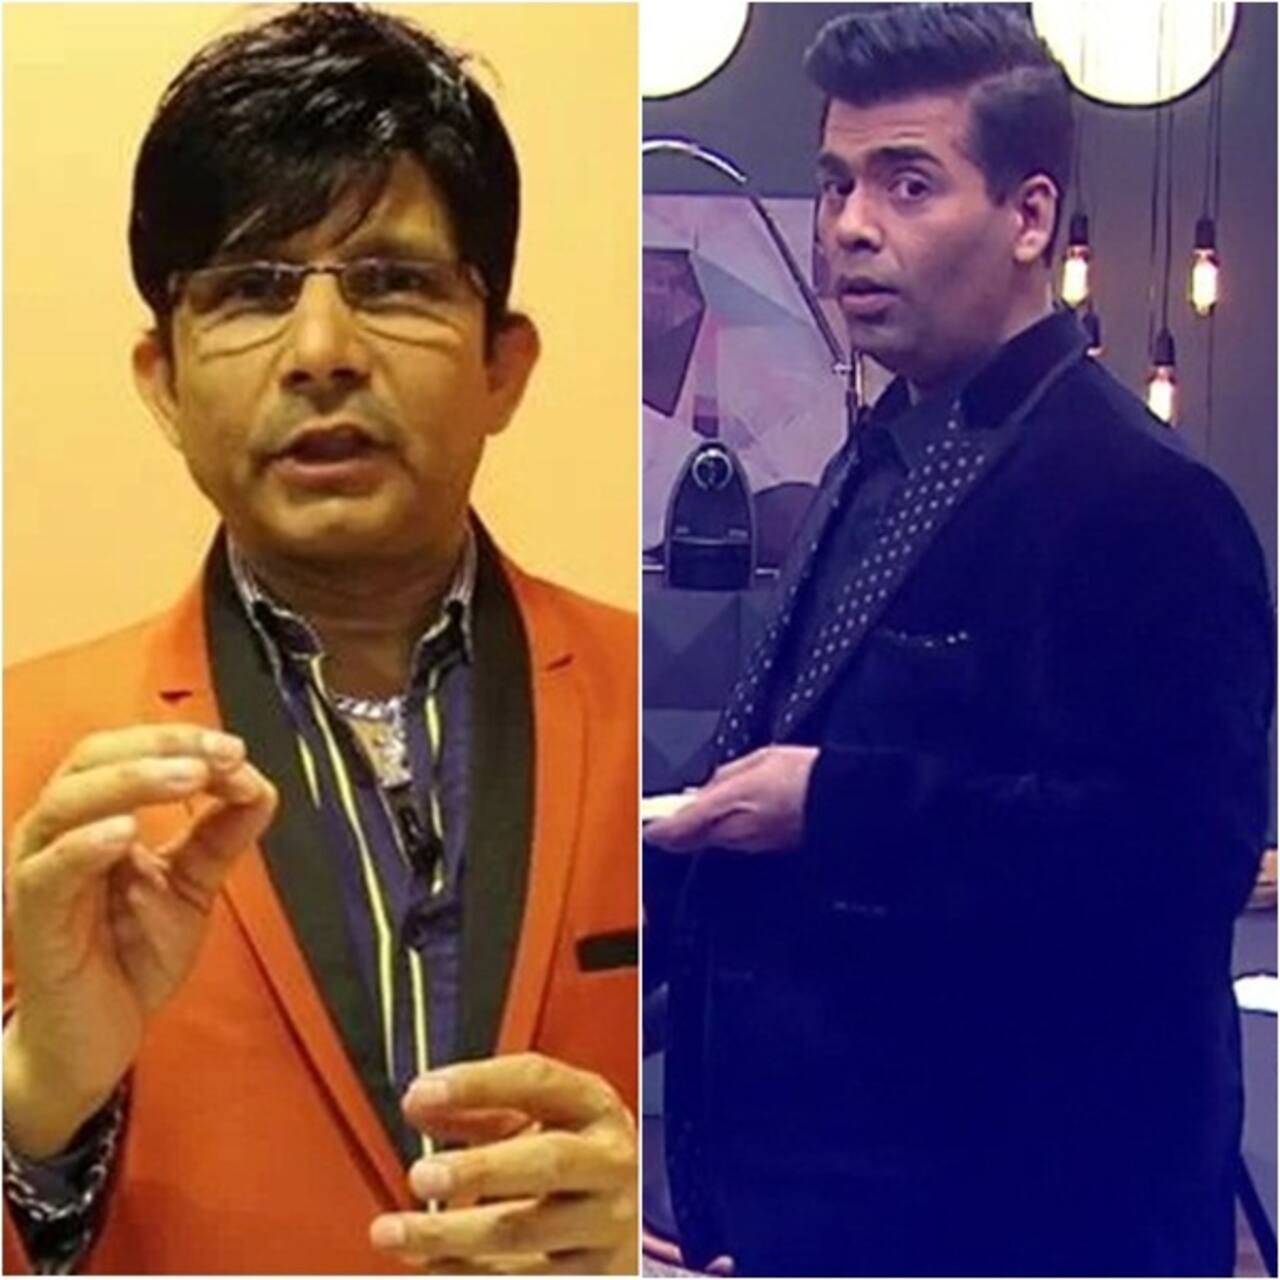 KRK claims Karan Johar tried to commit suicide after Brahmastra suffered huge losses; netizens call him 'jobless' [View Tweets]